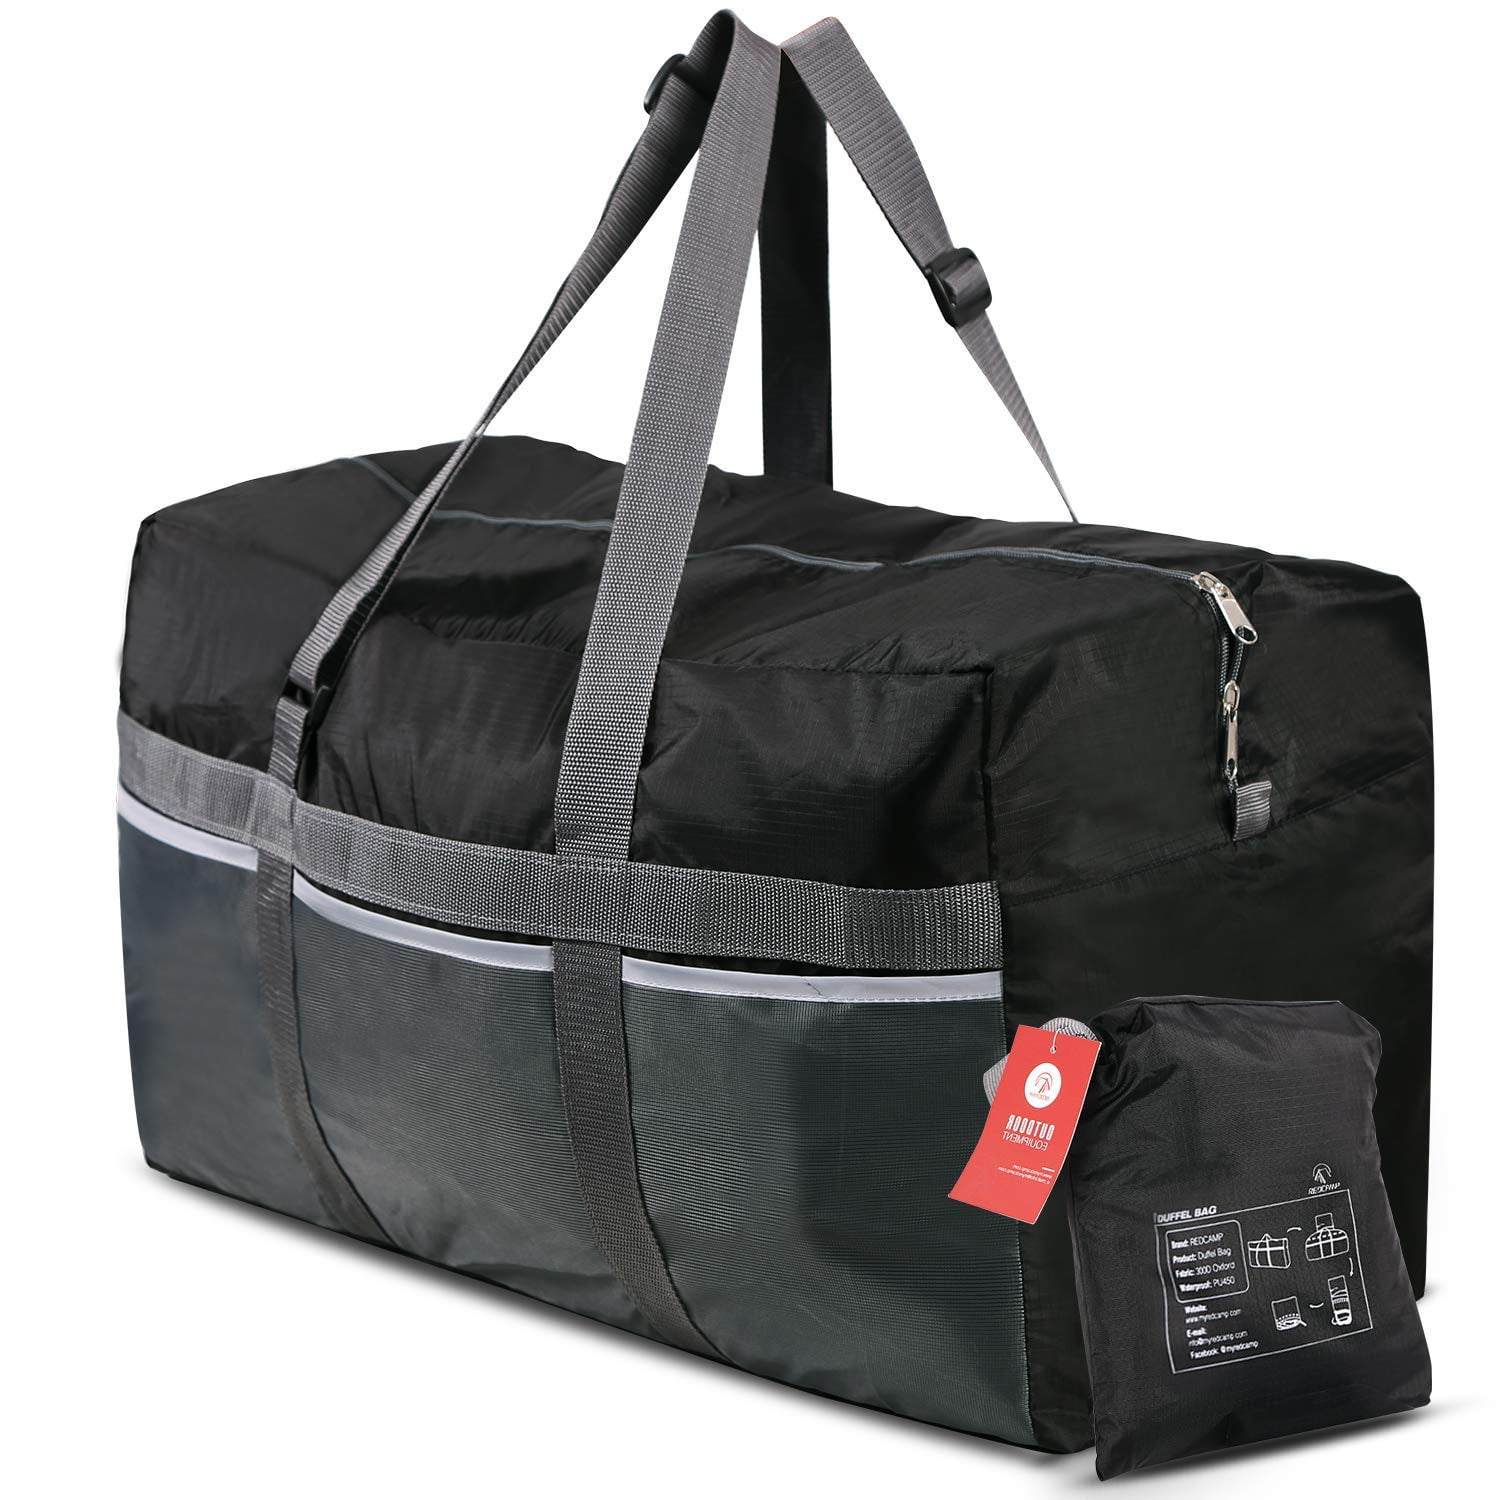 One Way DUFFLE BAG EXTRA LARGE - 130 L